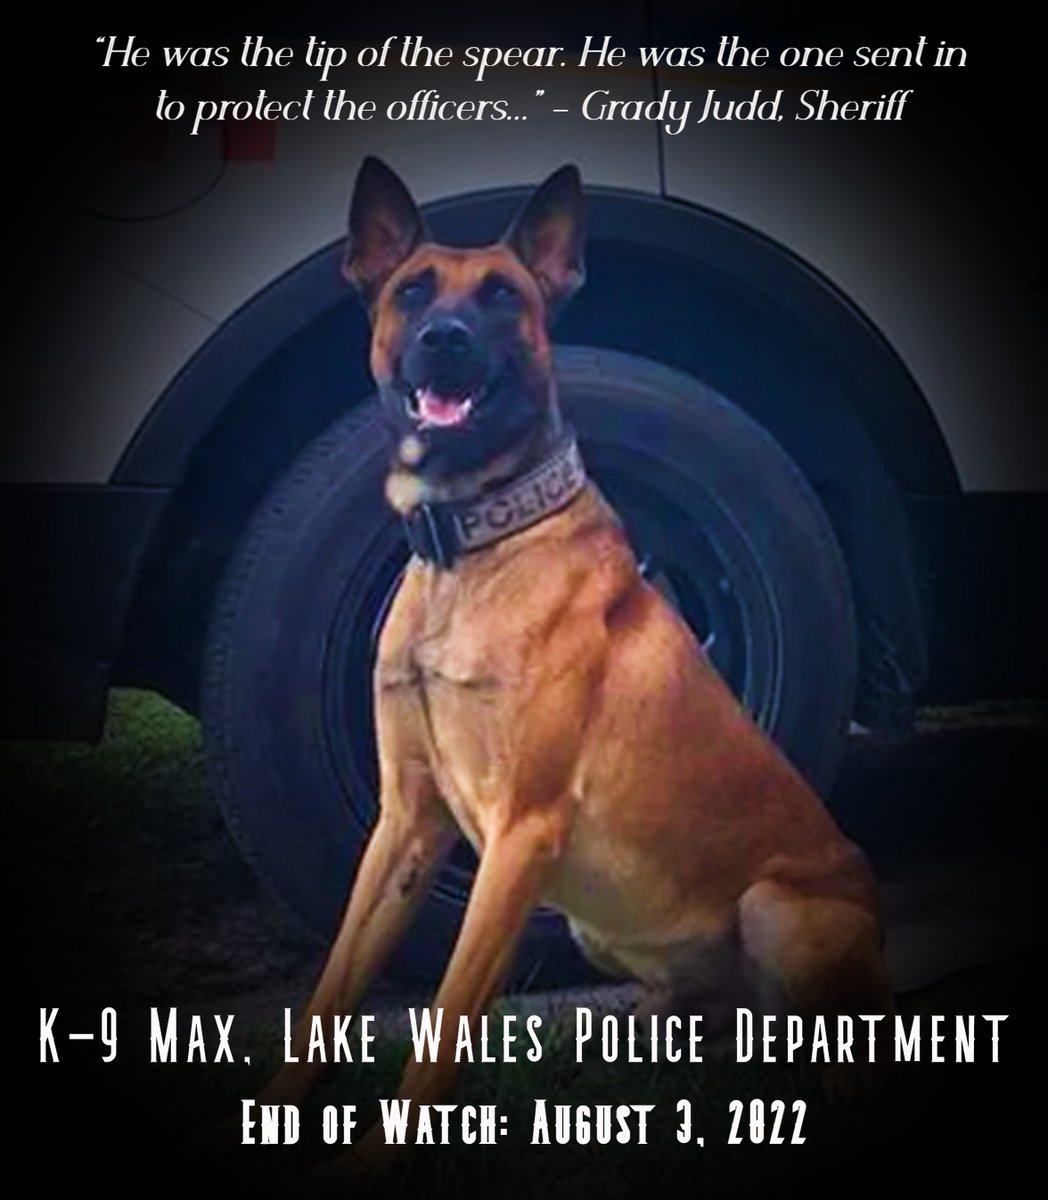 Such a sad day for the City of Lake Wales, their police department, and especially Officer Jared Joyner who lost a partner, friend, and family member.

Farewell, pupper.  

#K9Max   #LakeWalesPoliceDepartment 
#TheRainbowBridge